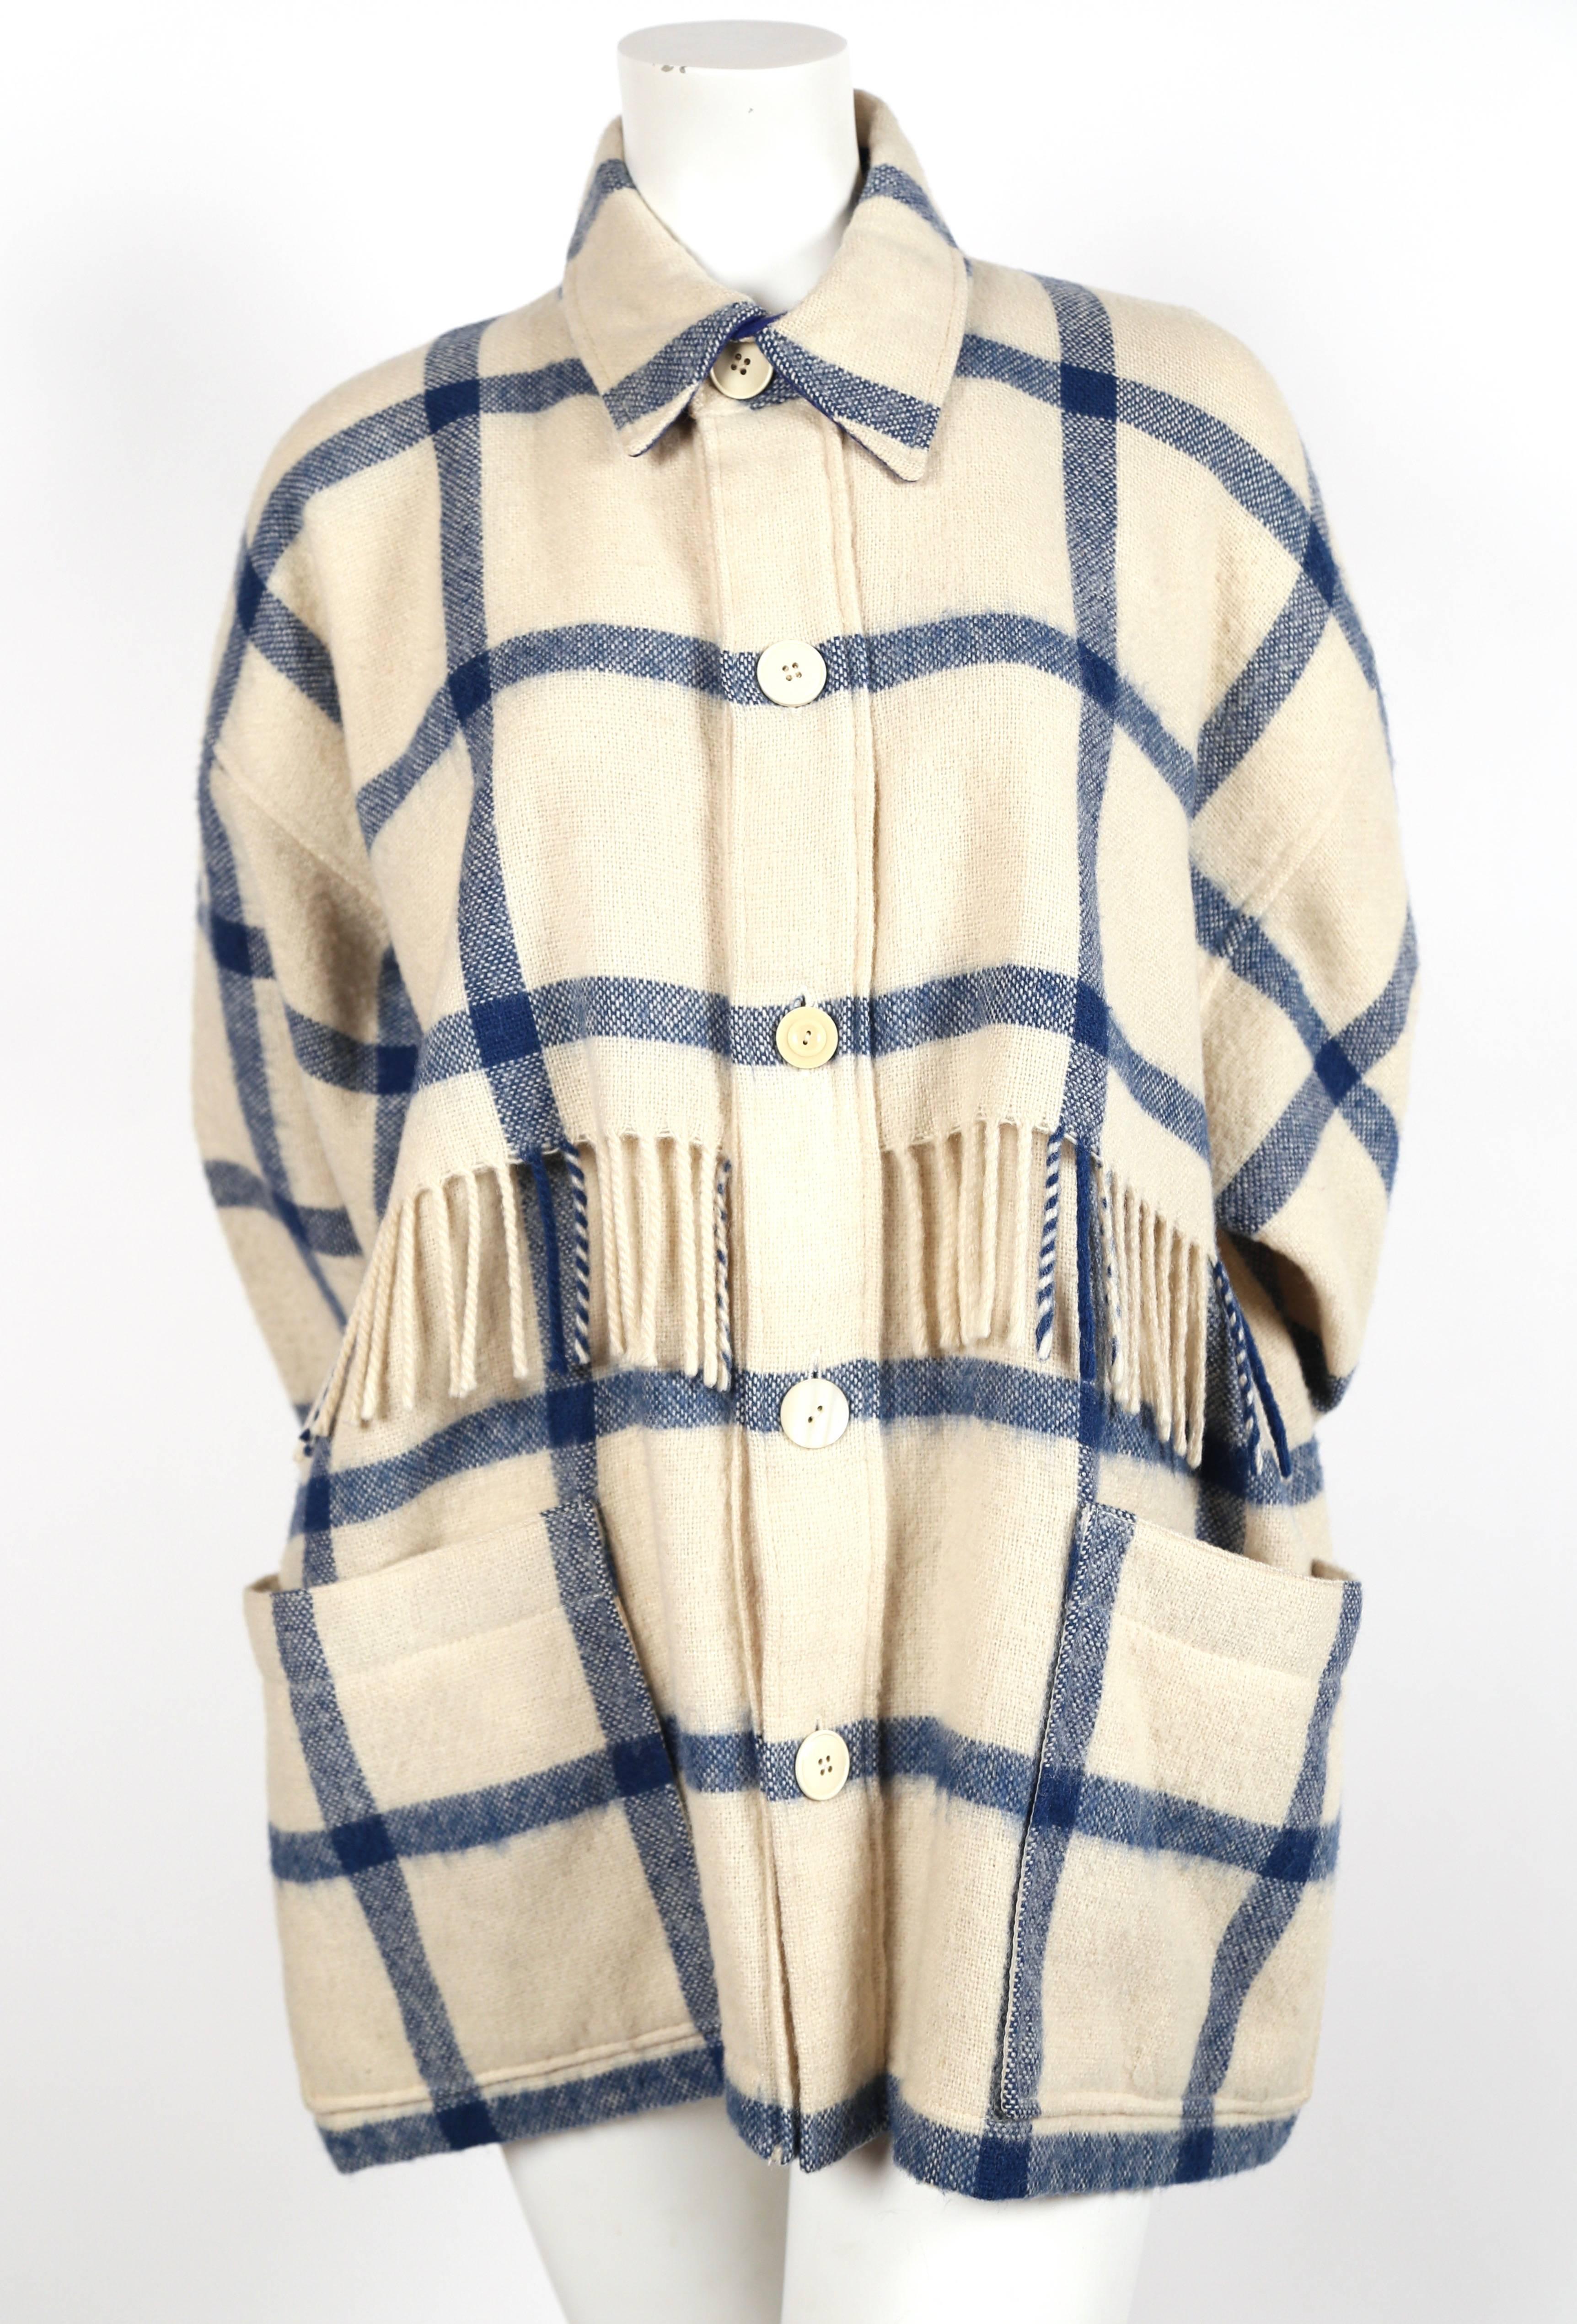 Cream and blue wool jacket and matching scarf with fringe designed by Jean Charles de Castelbajac dating the 1980's. Oversized cut best fits a medium or large. Made in France. Button closure. Pockets at hips. Very good condition. 